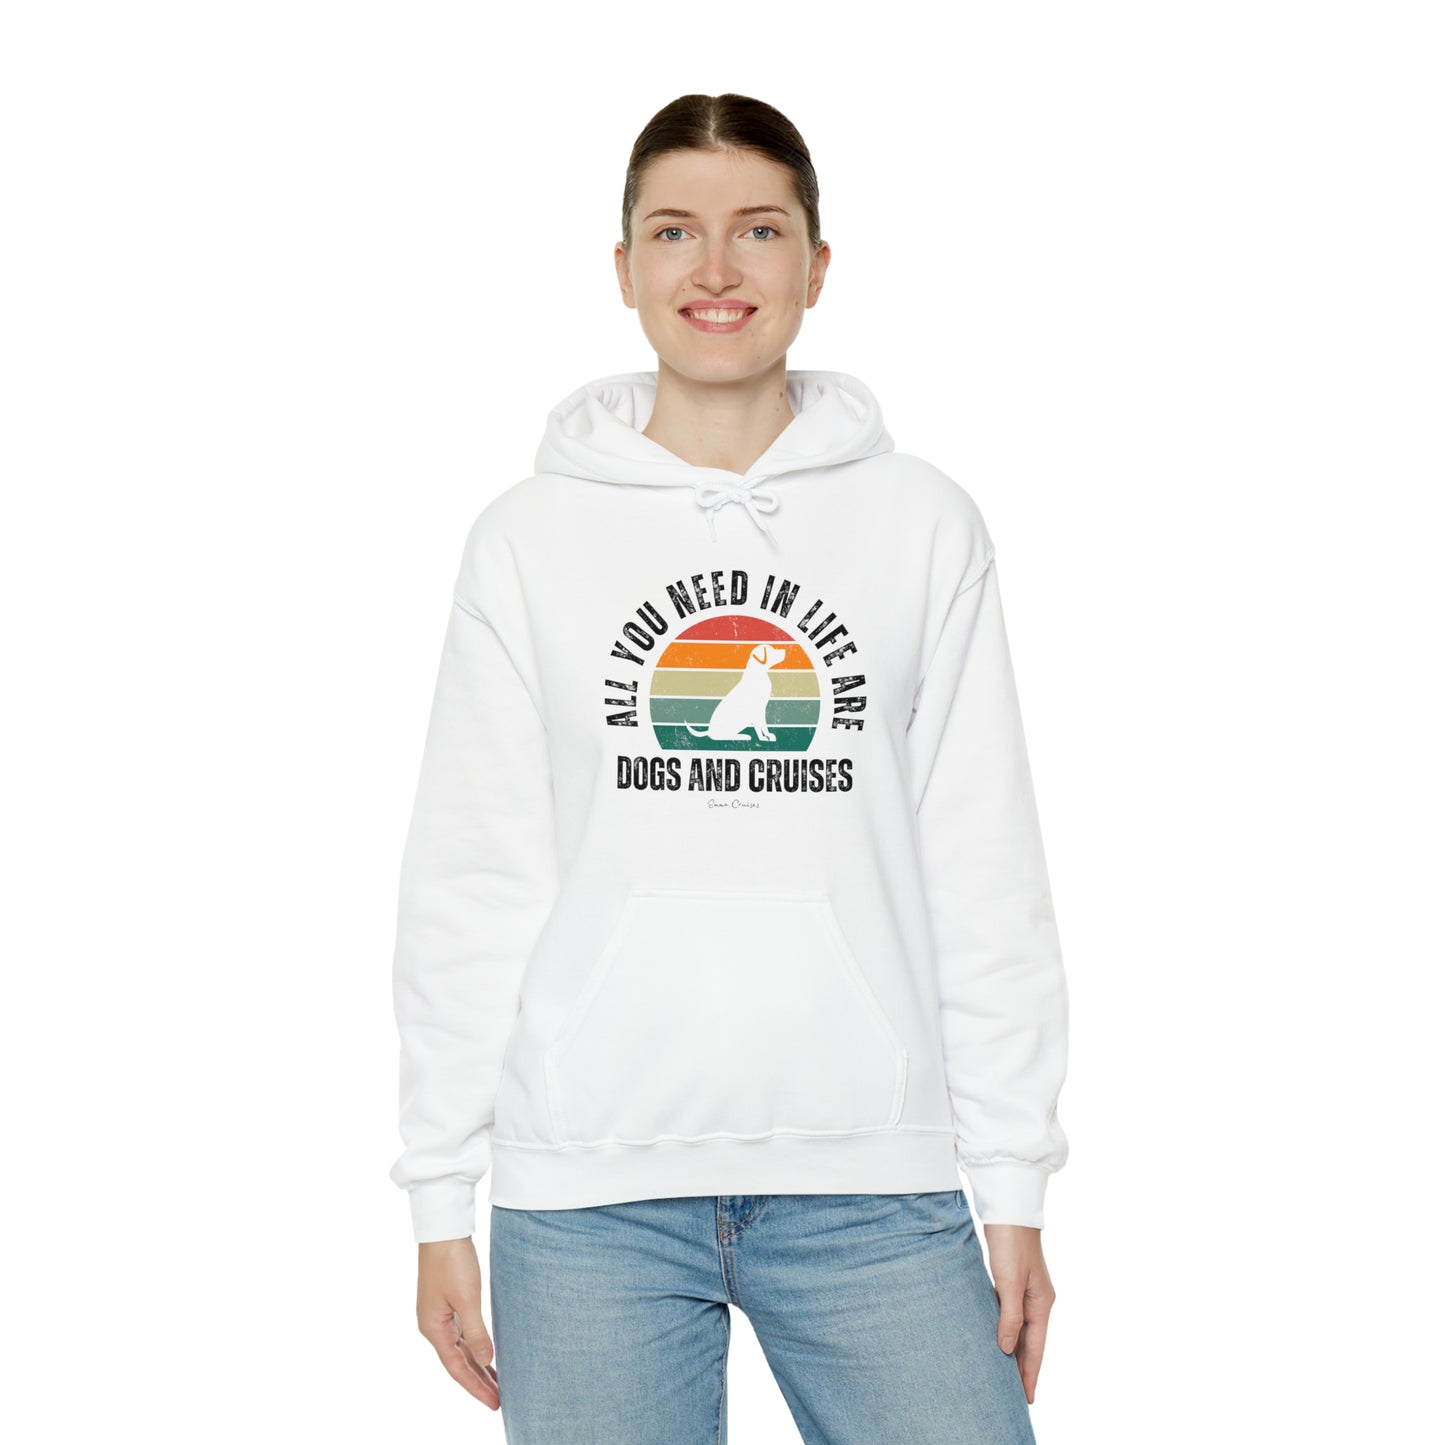 Dogs and Cruises - UNISEX Hoodie